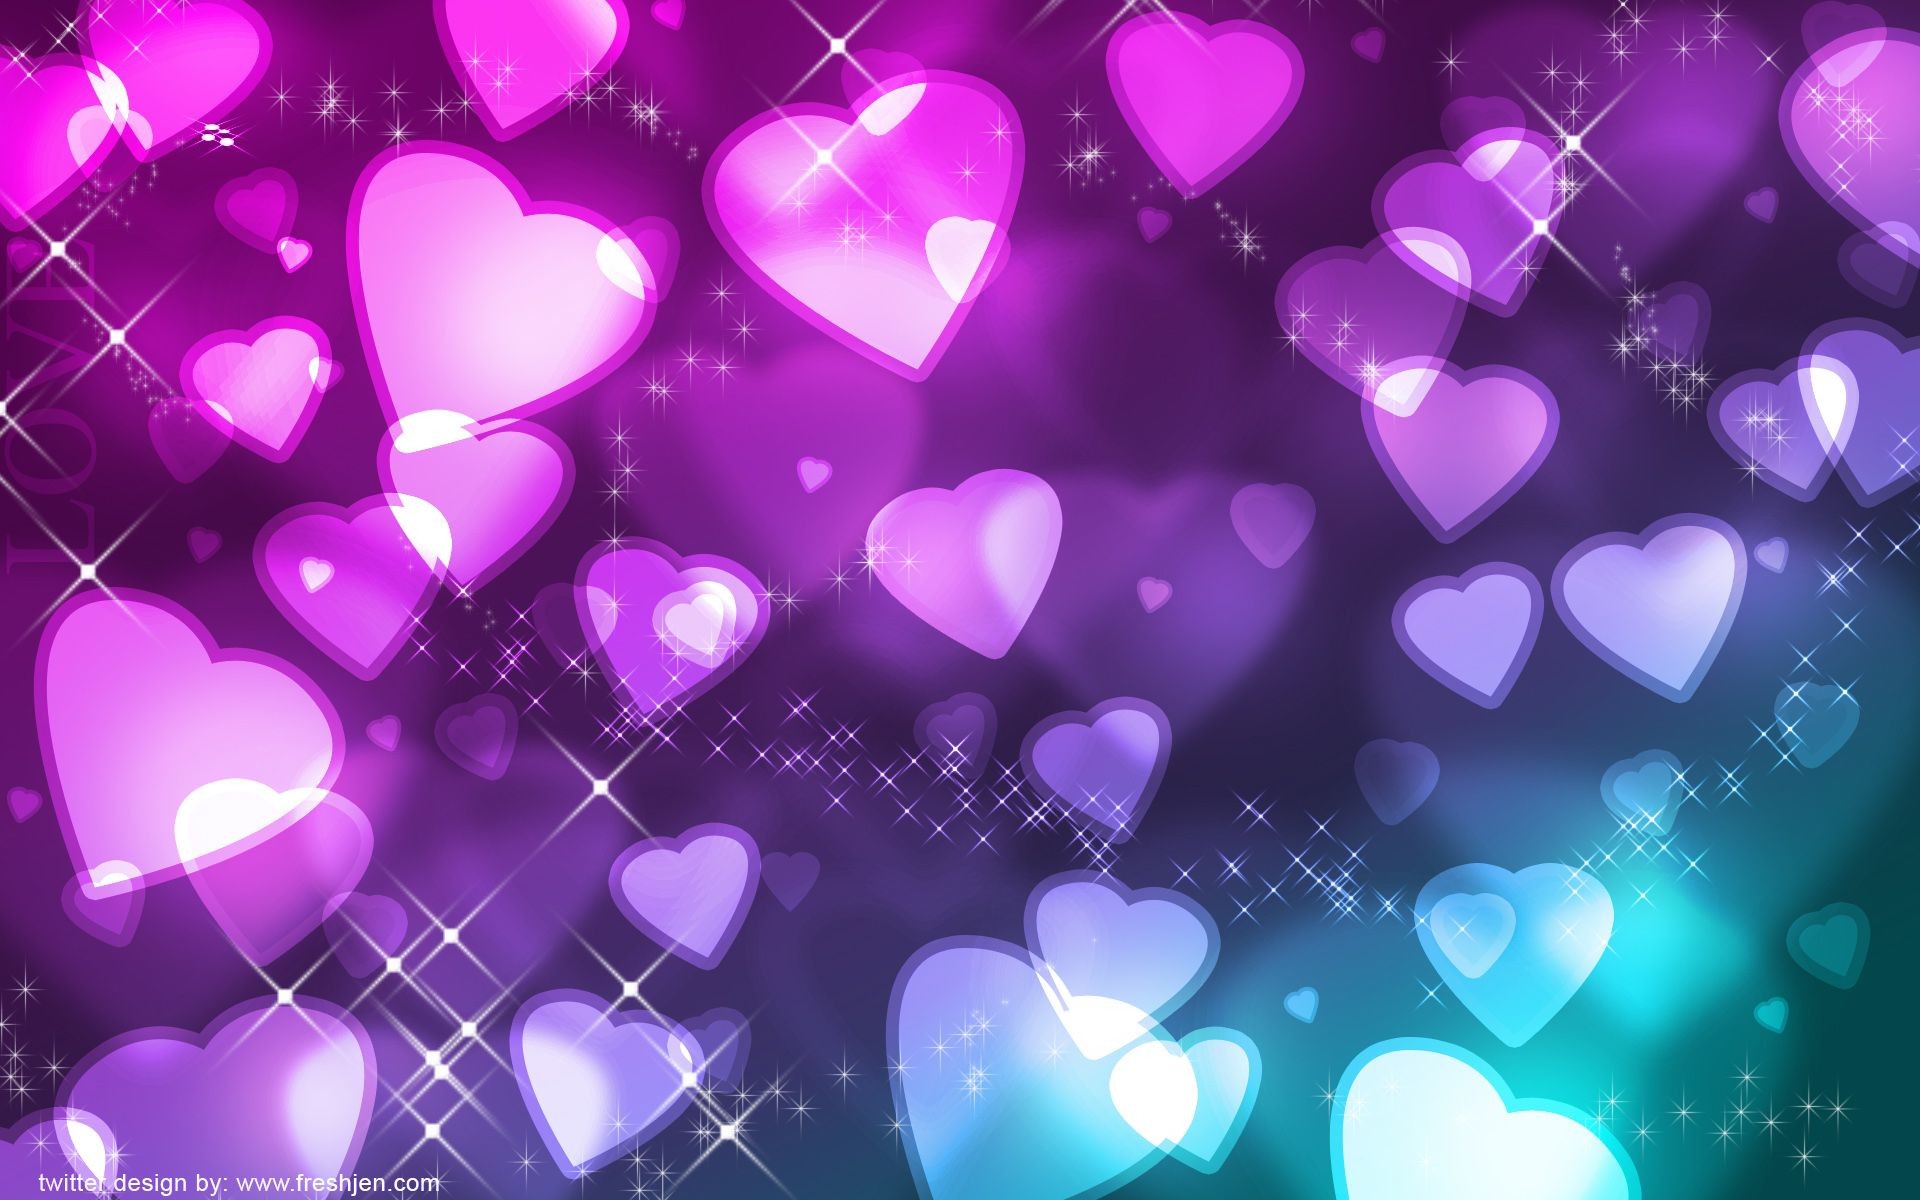 1920x1200 wallpaper of sparkely thangs | free cute heart valentine's day background